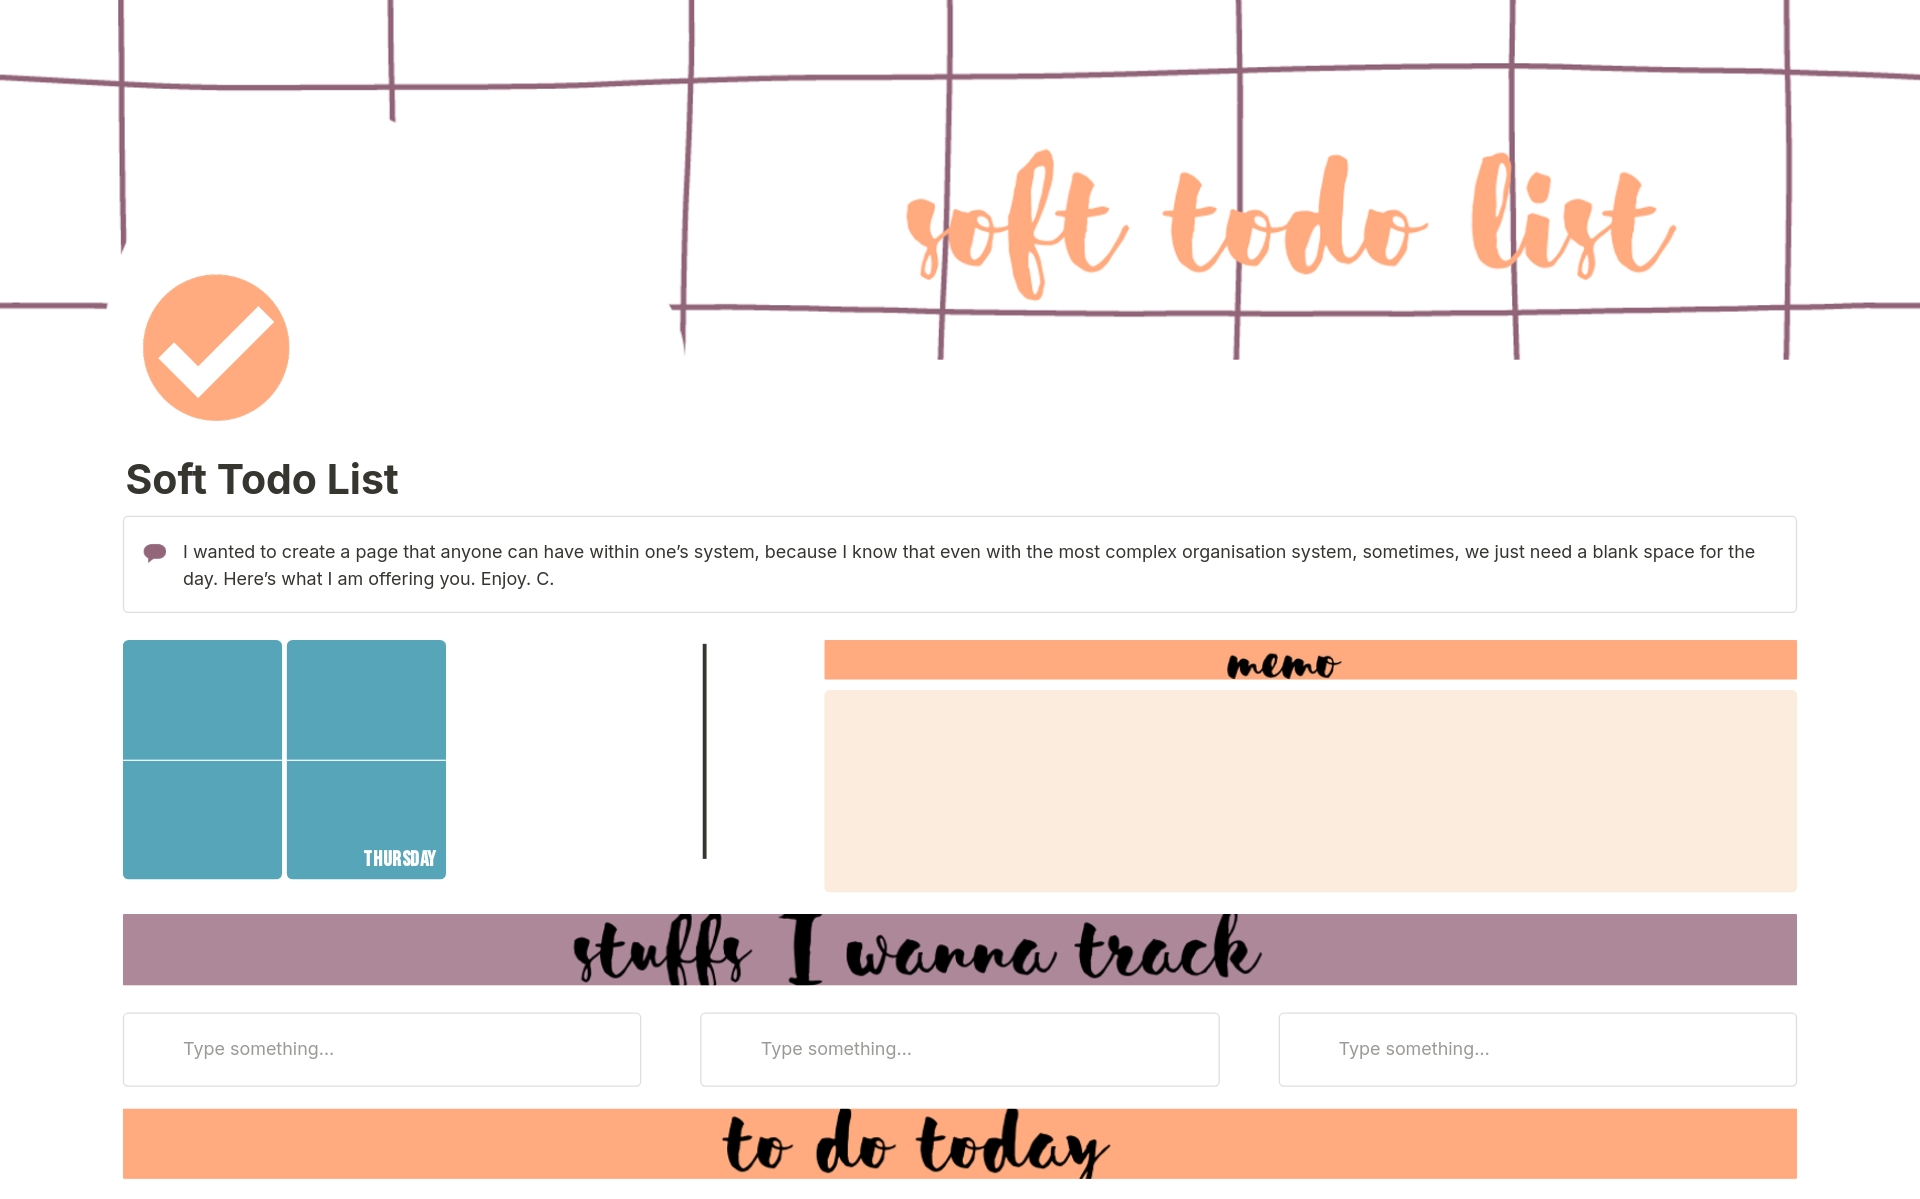 Notion can also be super aesthetically pleasing. I created this template for myself, one day when I didn't feel like listing my tasks in my system: I just wanted something pretty, soft, quick... A kind of cuddly template!